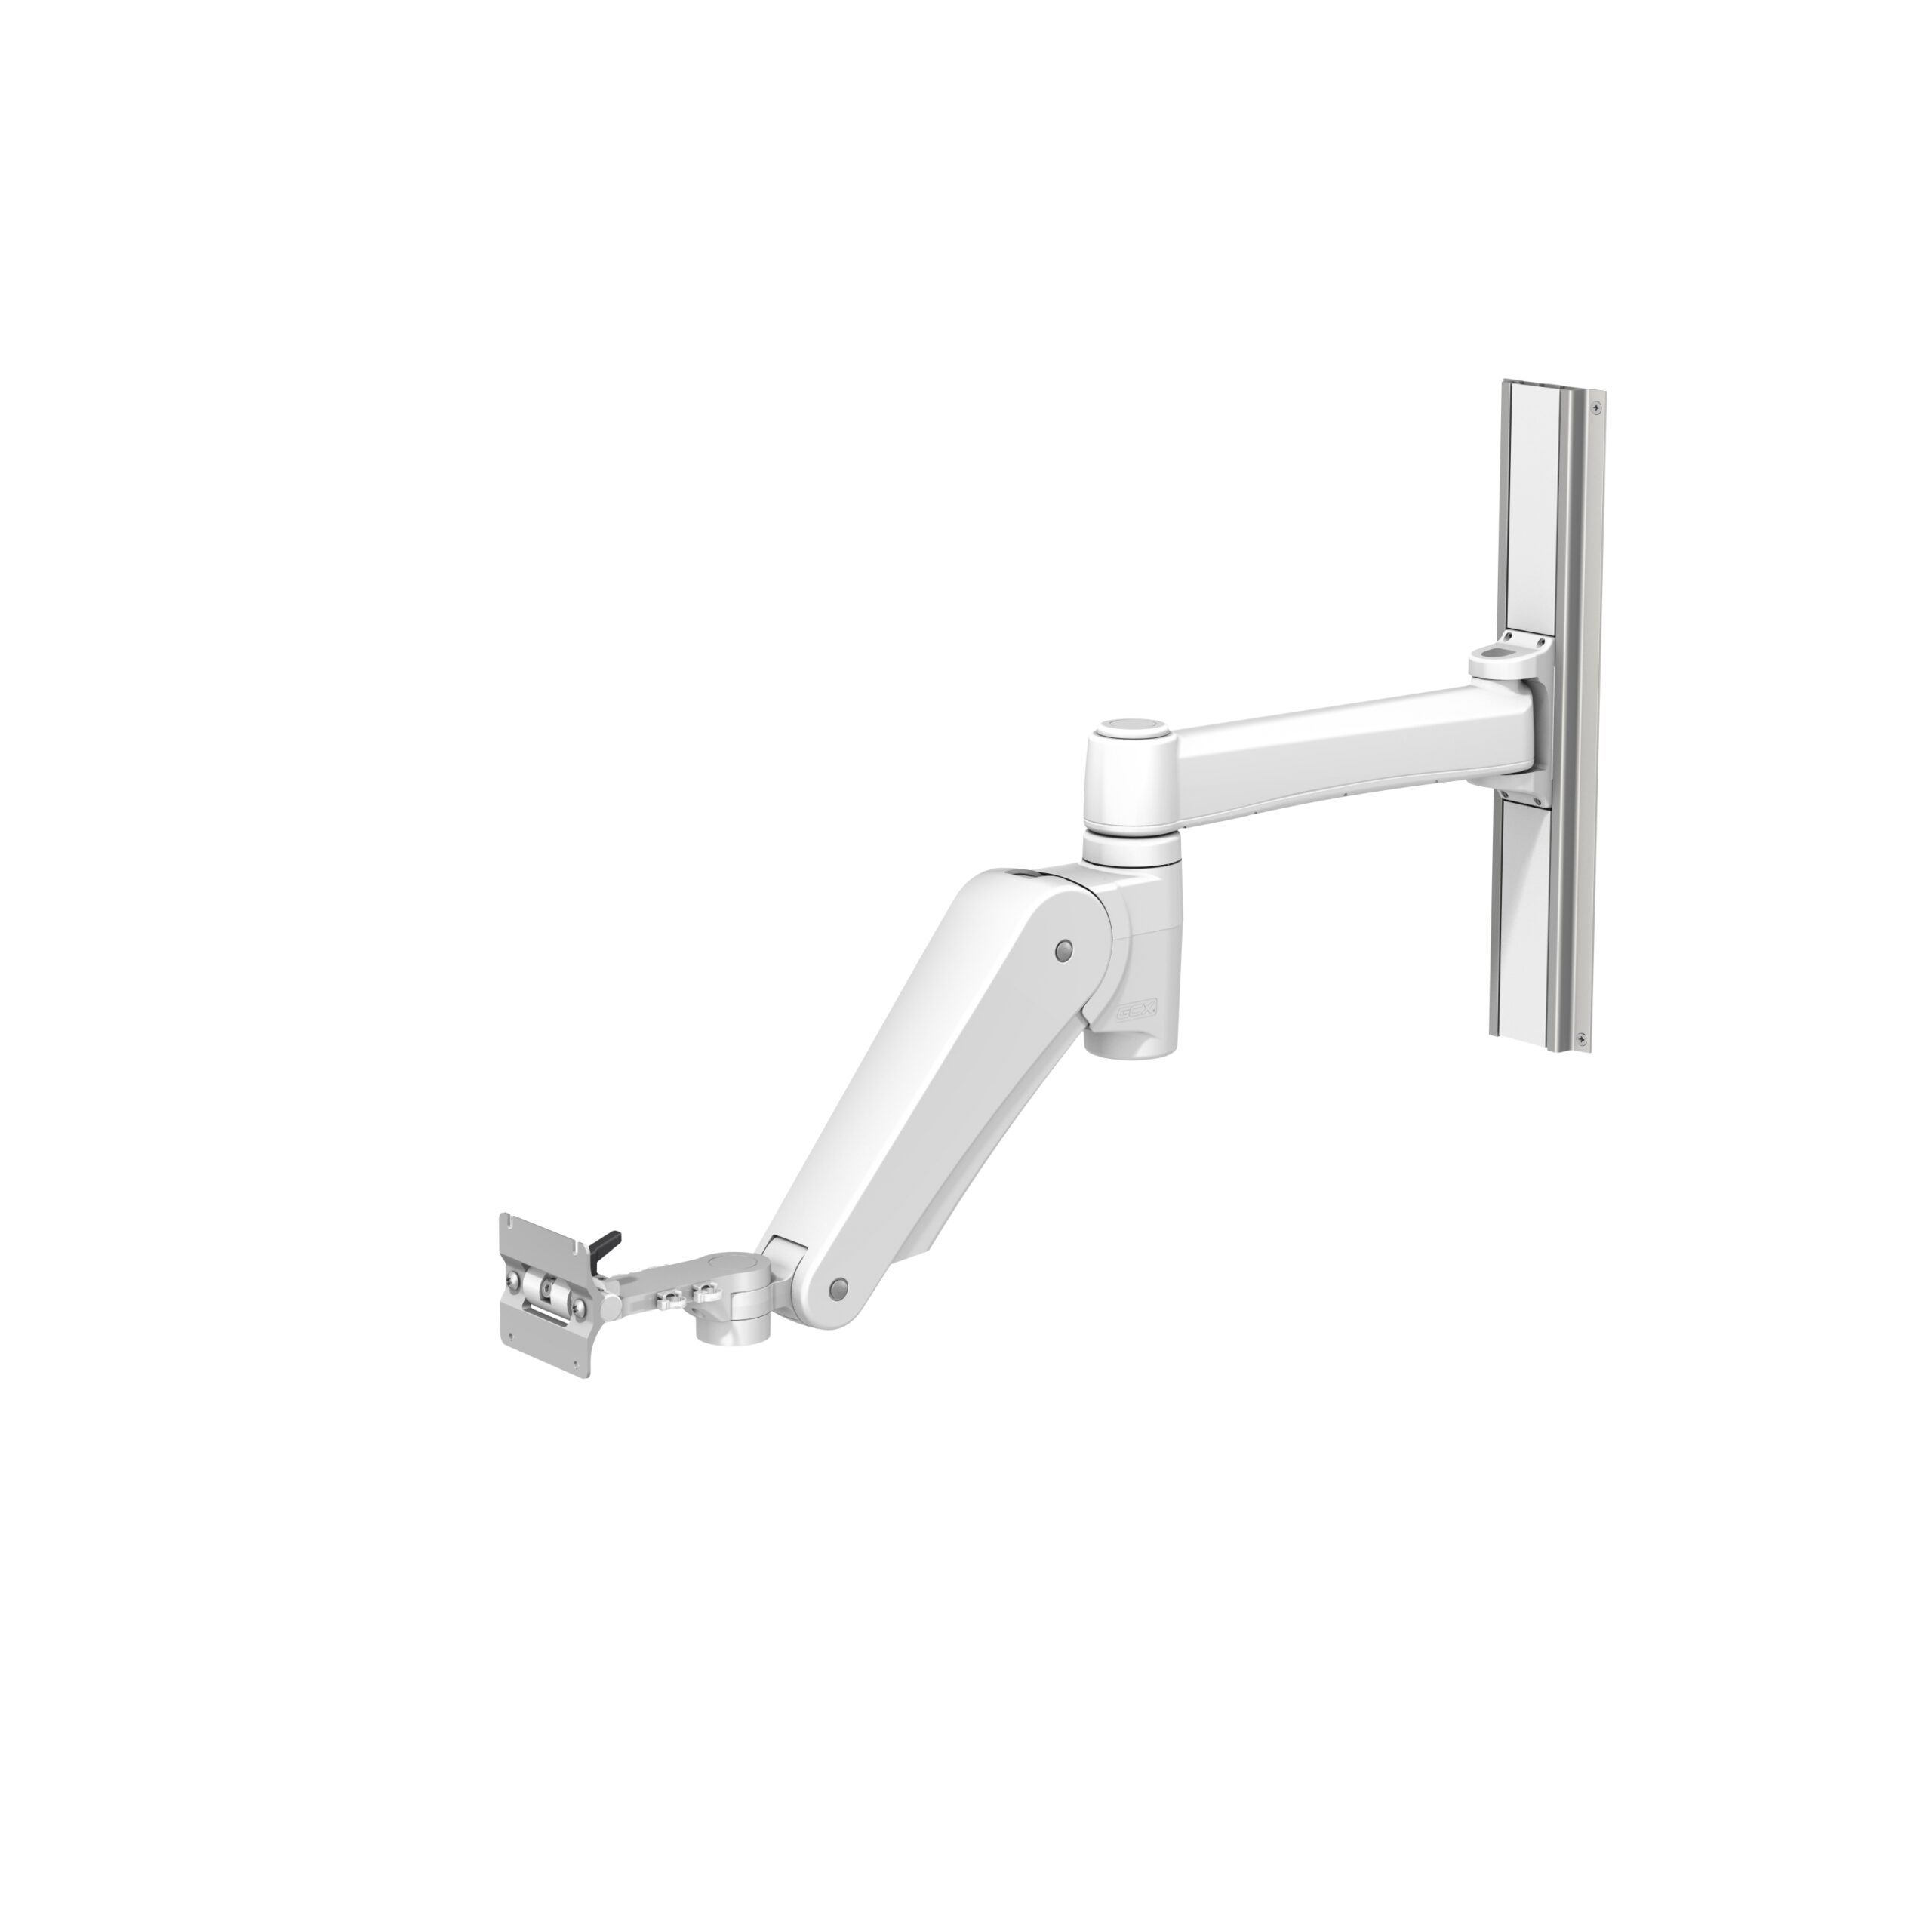 VHM-P (Non-Locking) Variable Height Arm with 14